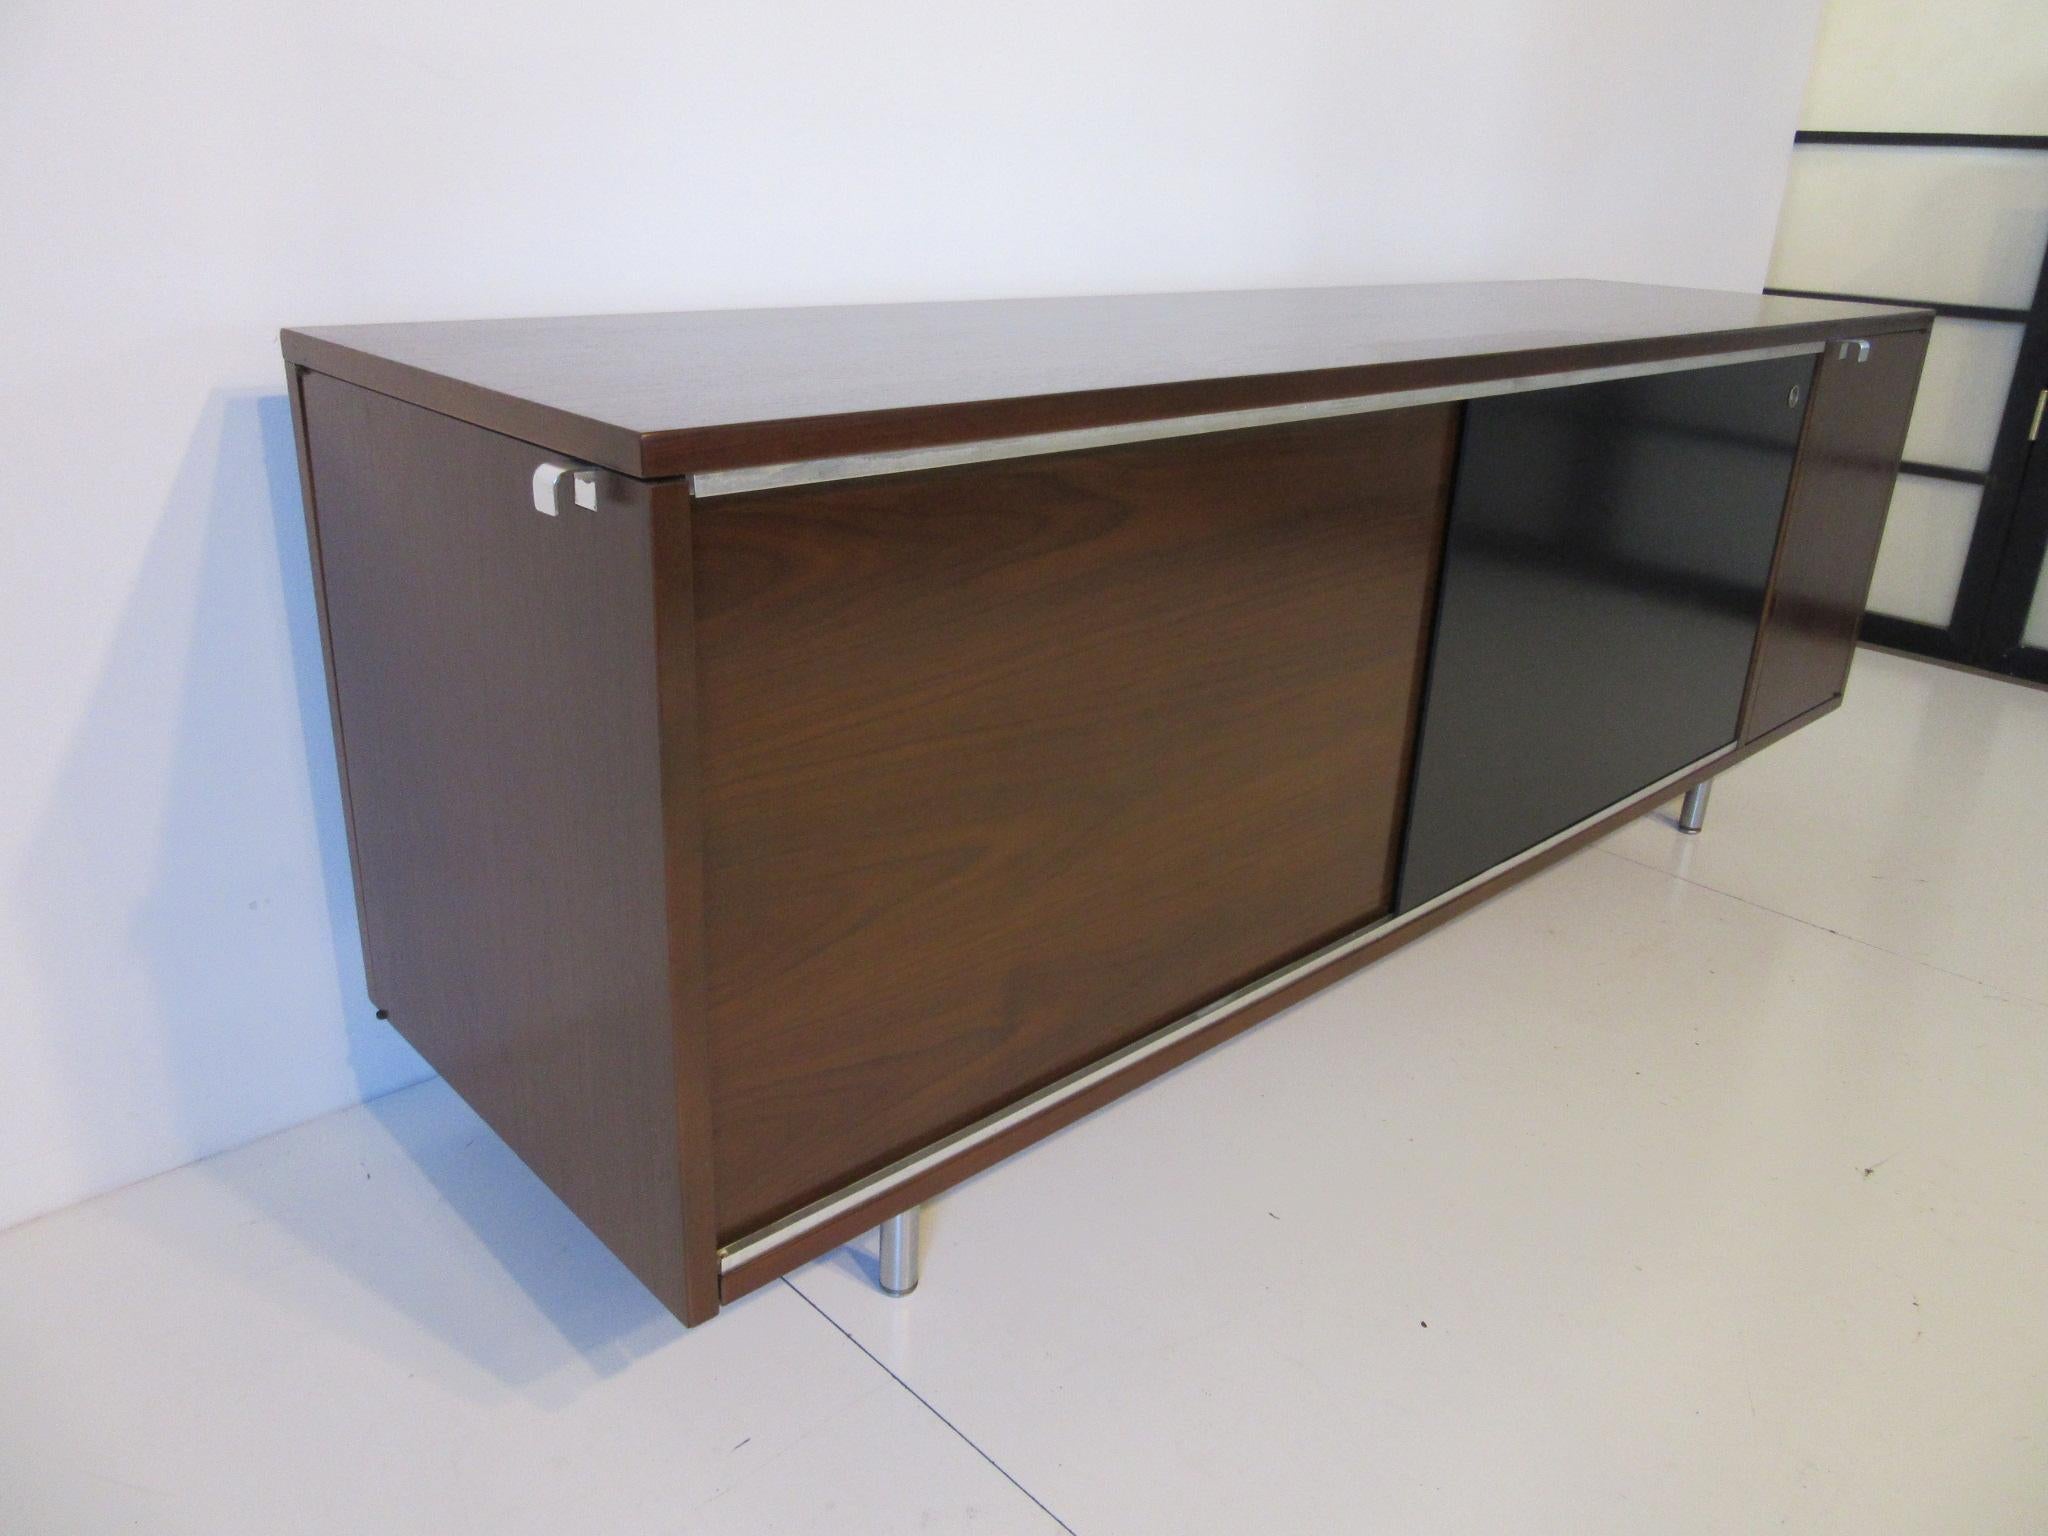 A walnut credenza with sliding door five drawers to the inside, small door to the right with a shelve and storage and a door on the end with the same. Complemented by brushed stainless legs, pulls and details. The backside is finished with the same